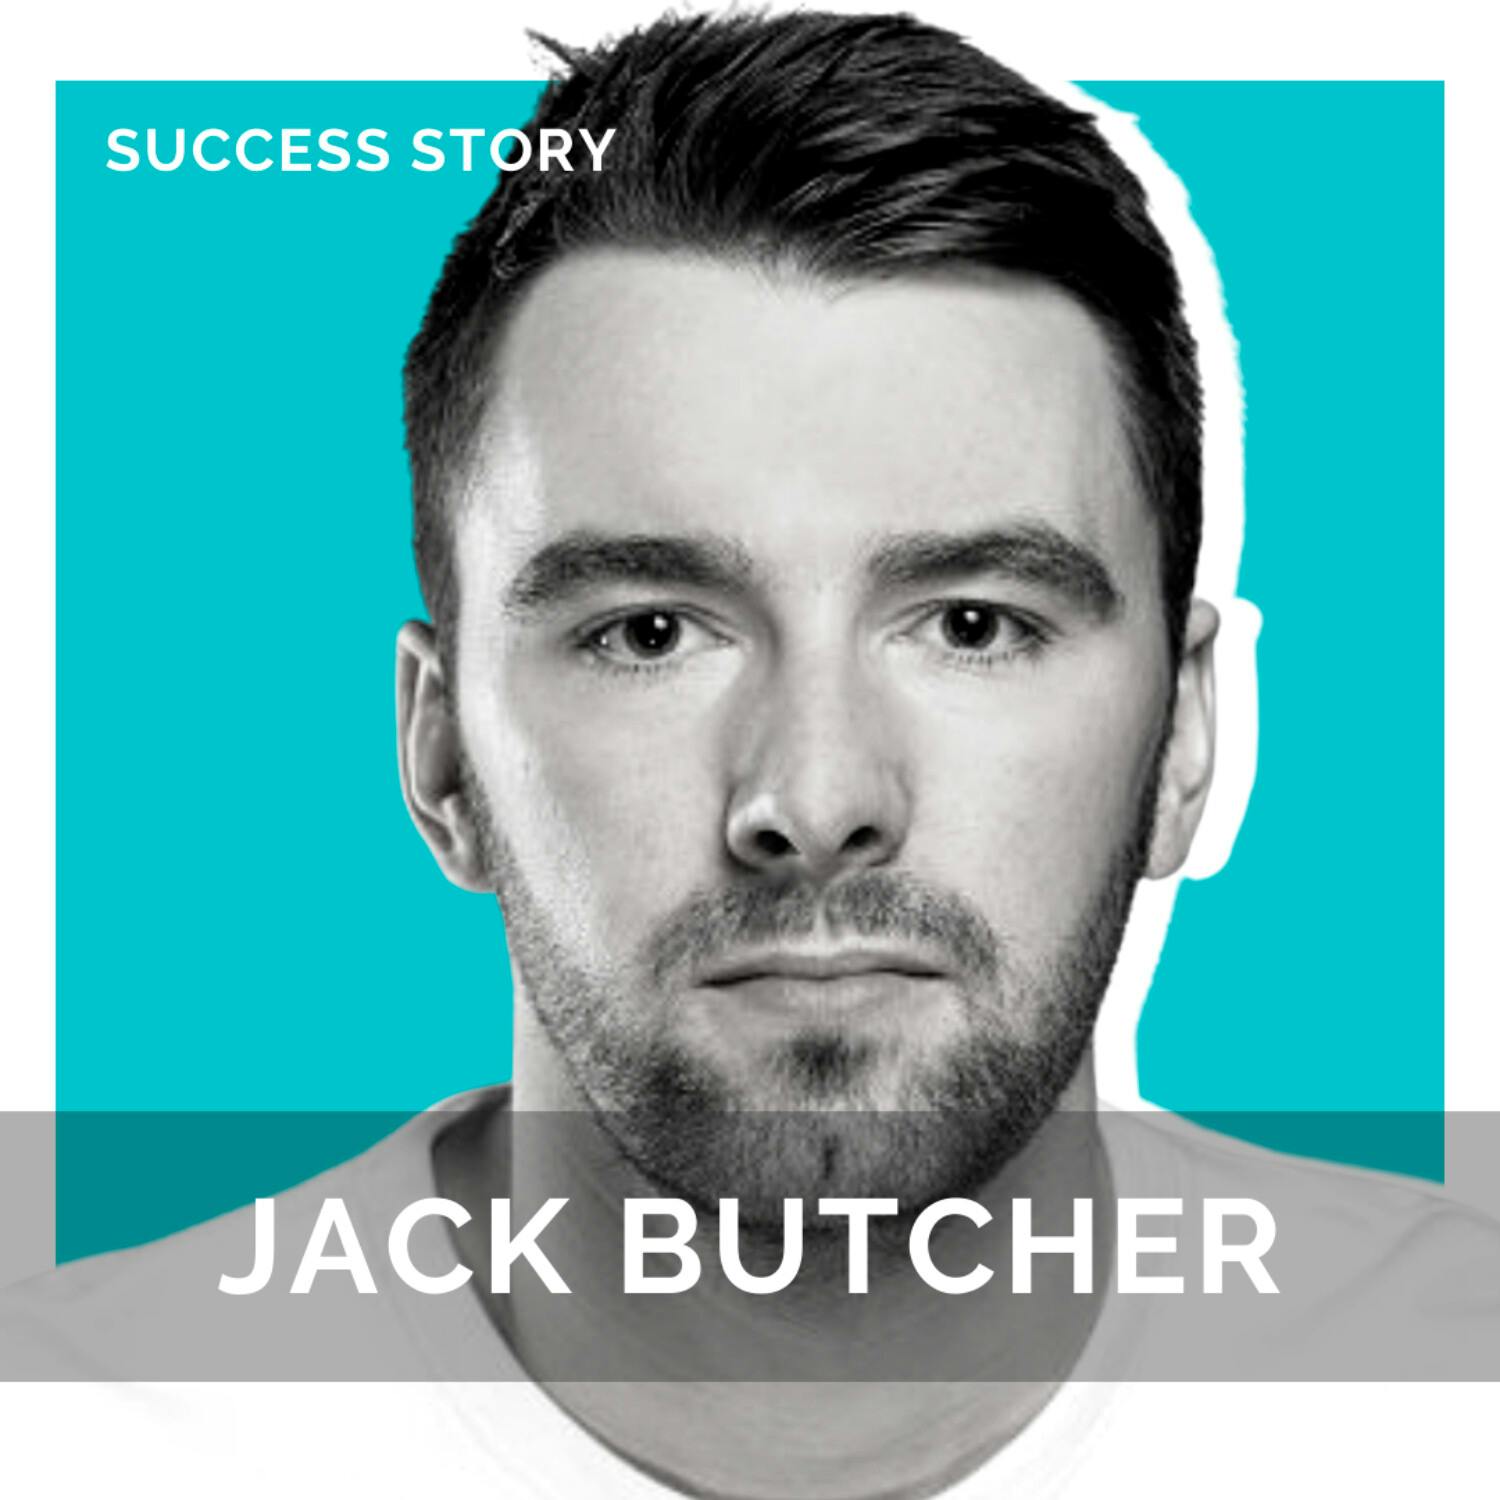 Jack Butcher, Founder of Visualize Value | How to Build a $1m+/Year Course in 1.5 Years